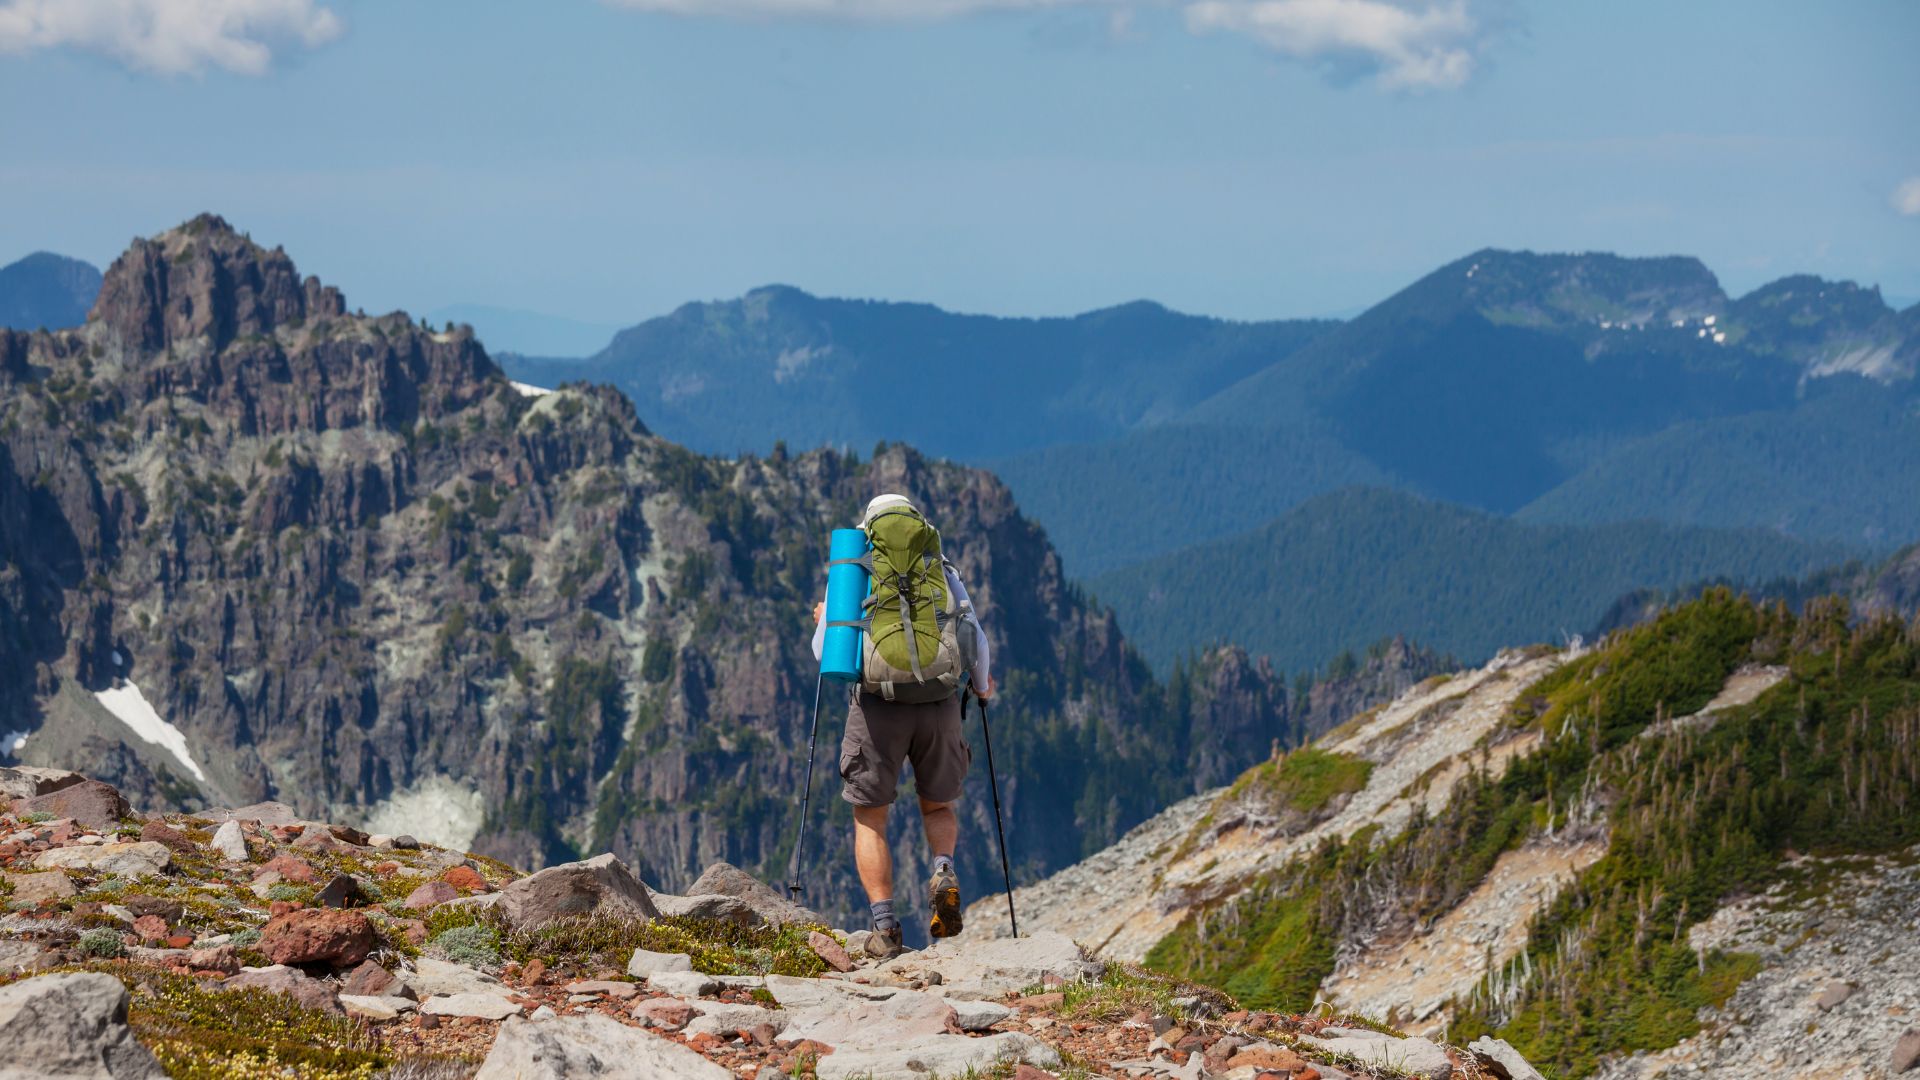 A hiker journeys into the mountains of North Cascades National Park